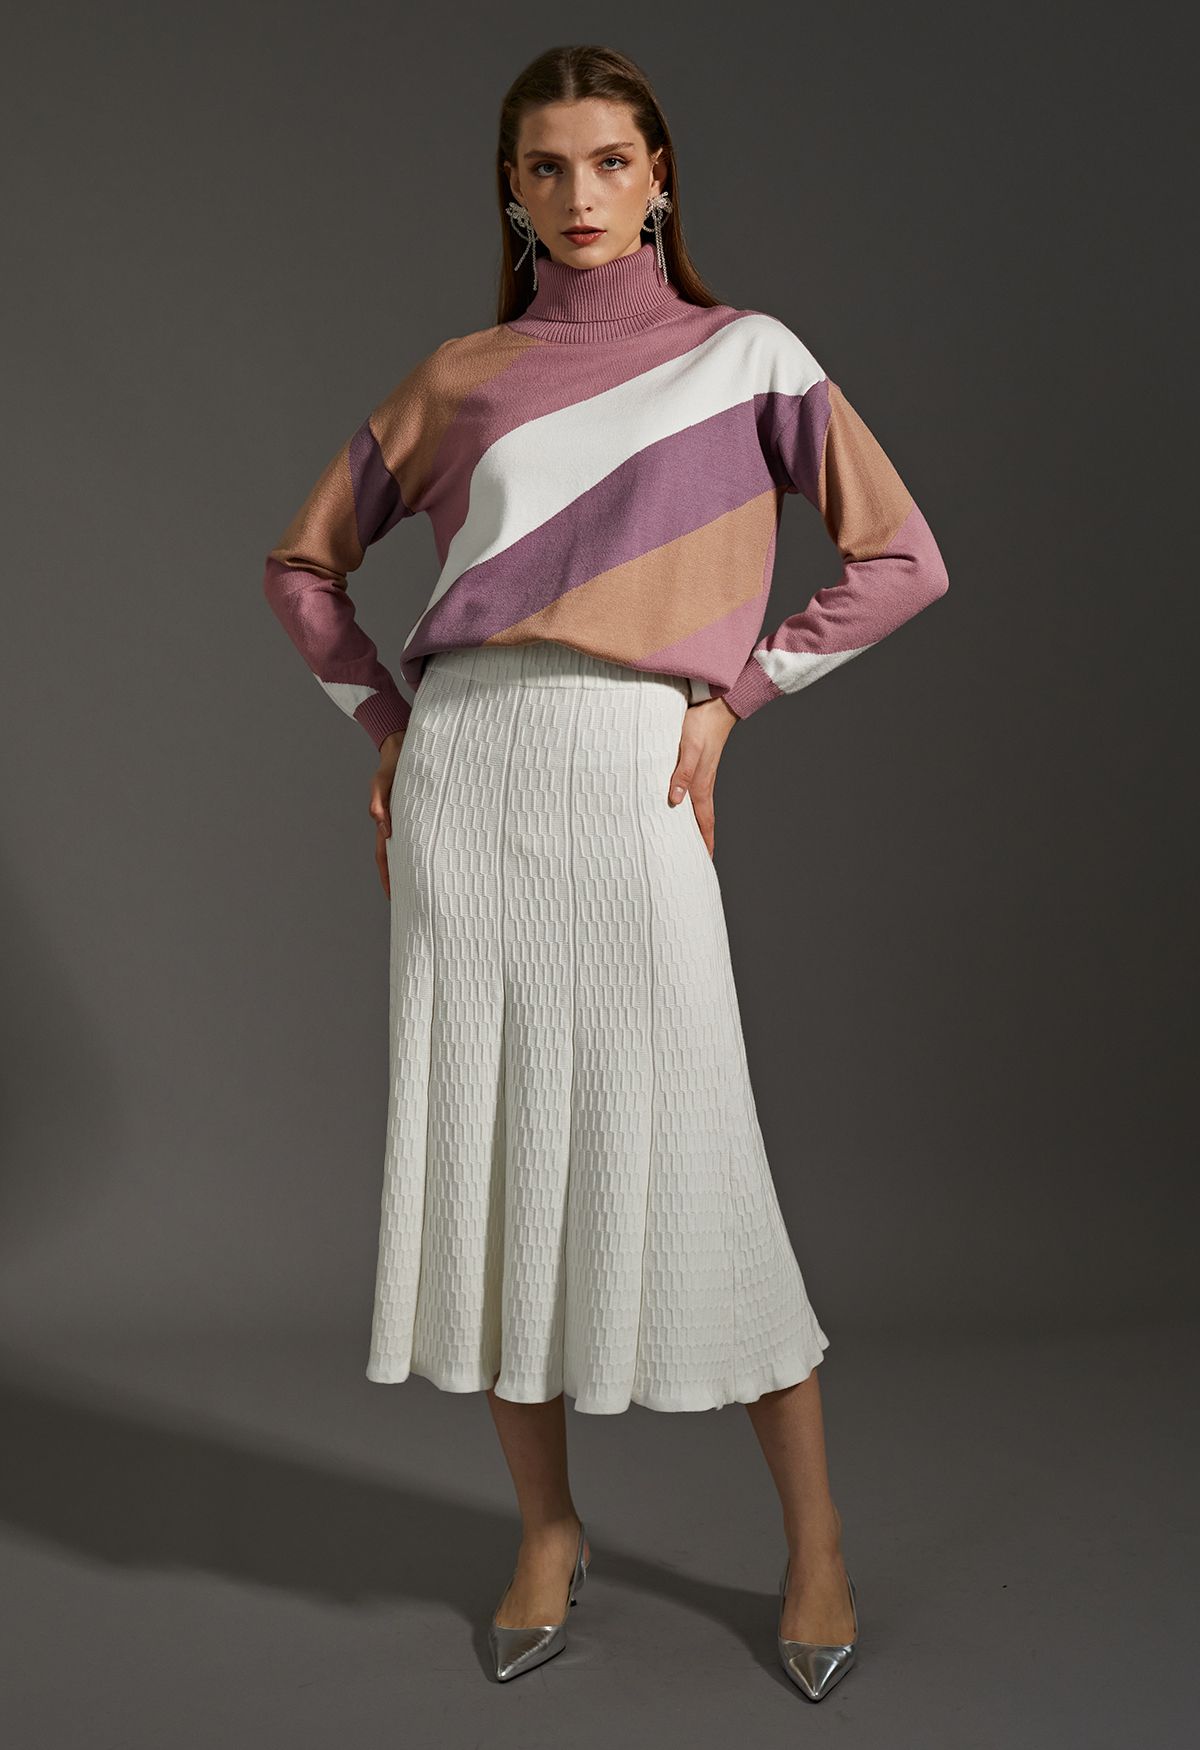 Striped Color Block Turtleneck Knit Sweater in Pink